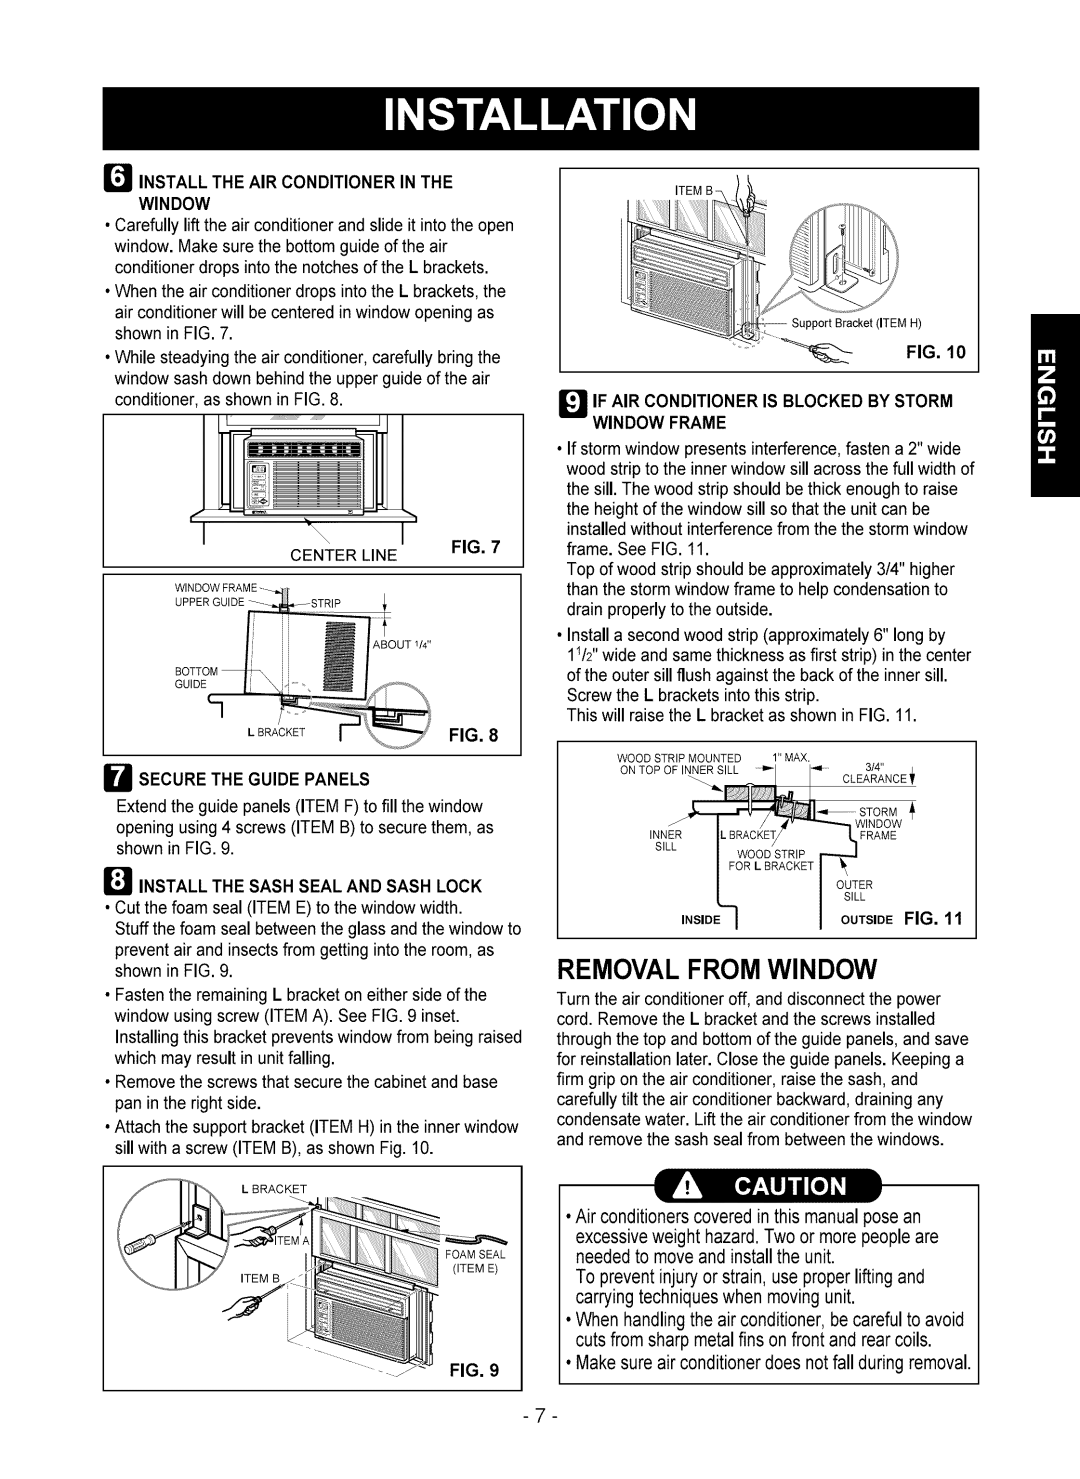 Kenmore 580.75051 owner manual Removal From Window, If Air Conditioner Is Blocked By Storm, Window Frame, Outsidefig 